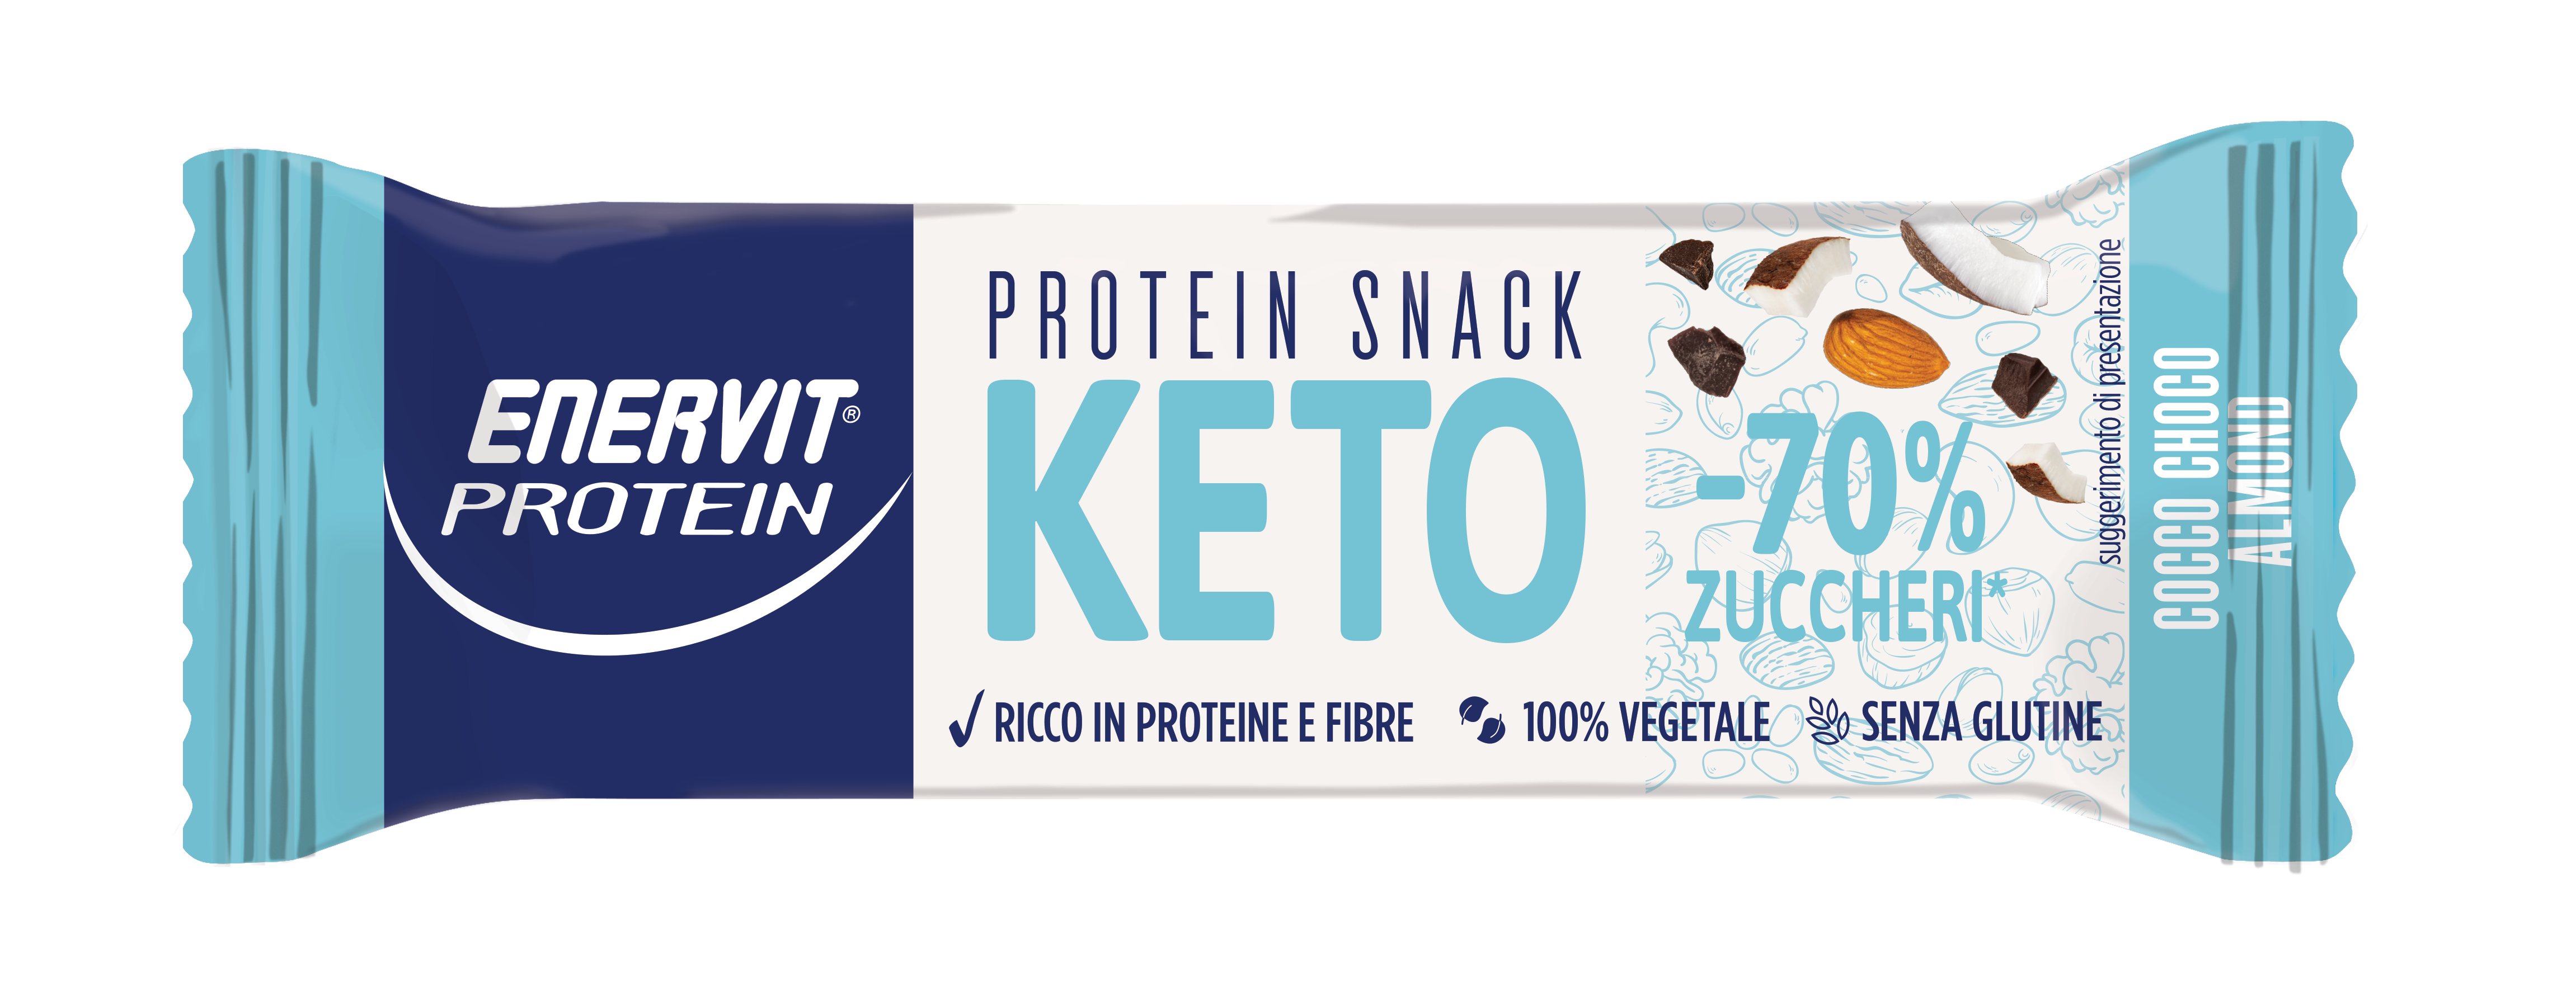 Image of Protein Snack Keto Coco Choco Almond ENERVIT PROTEIN 35g